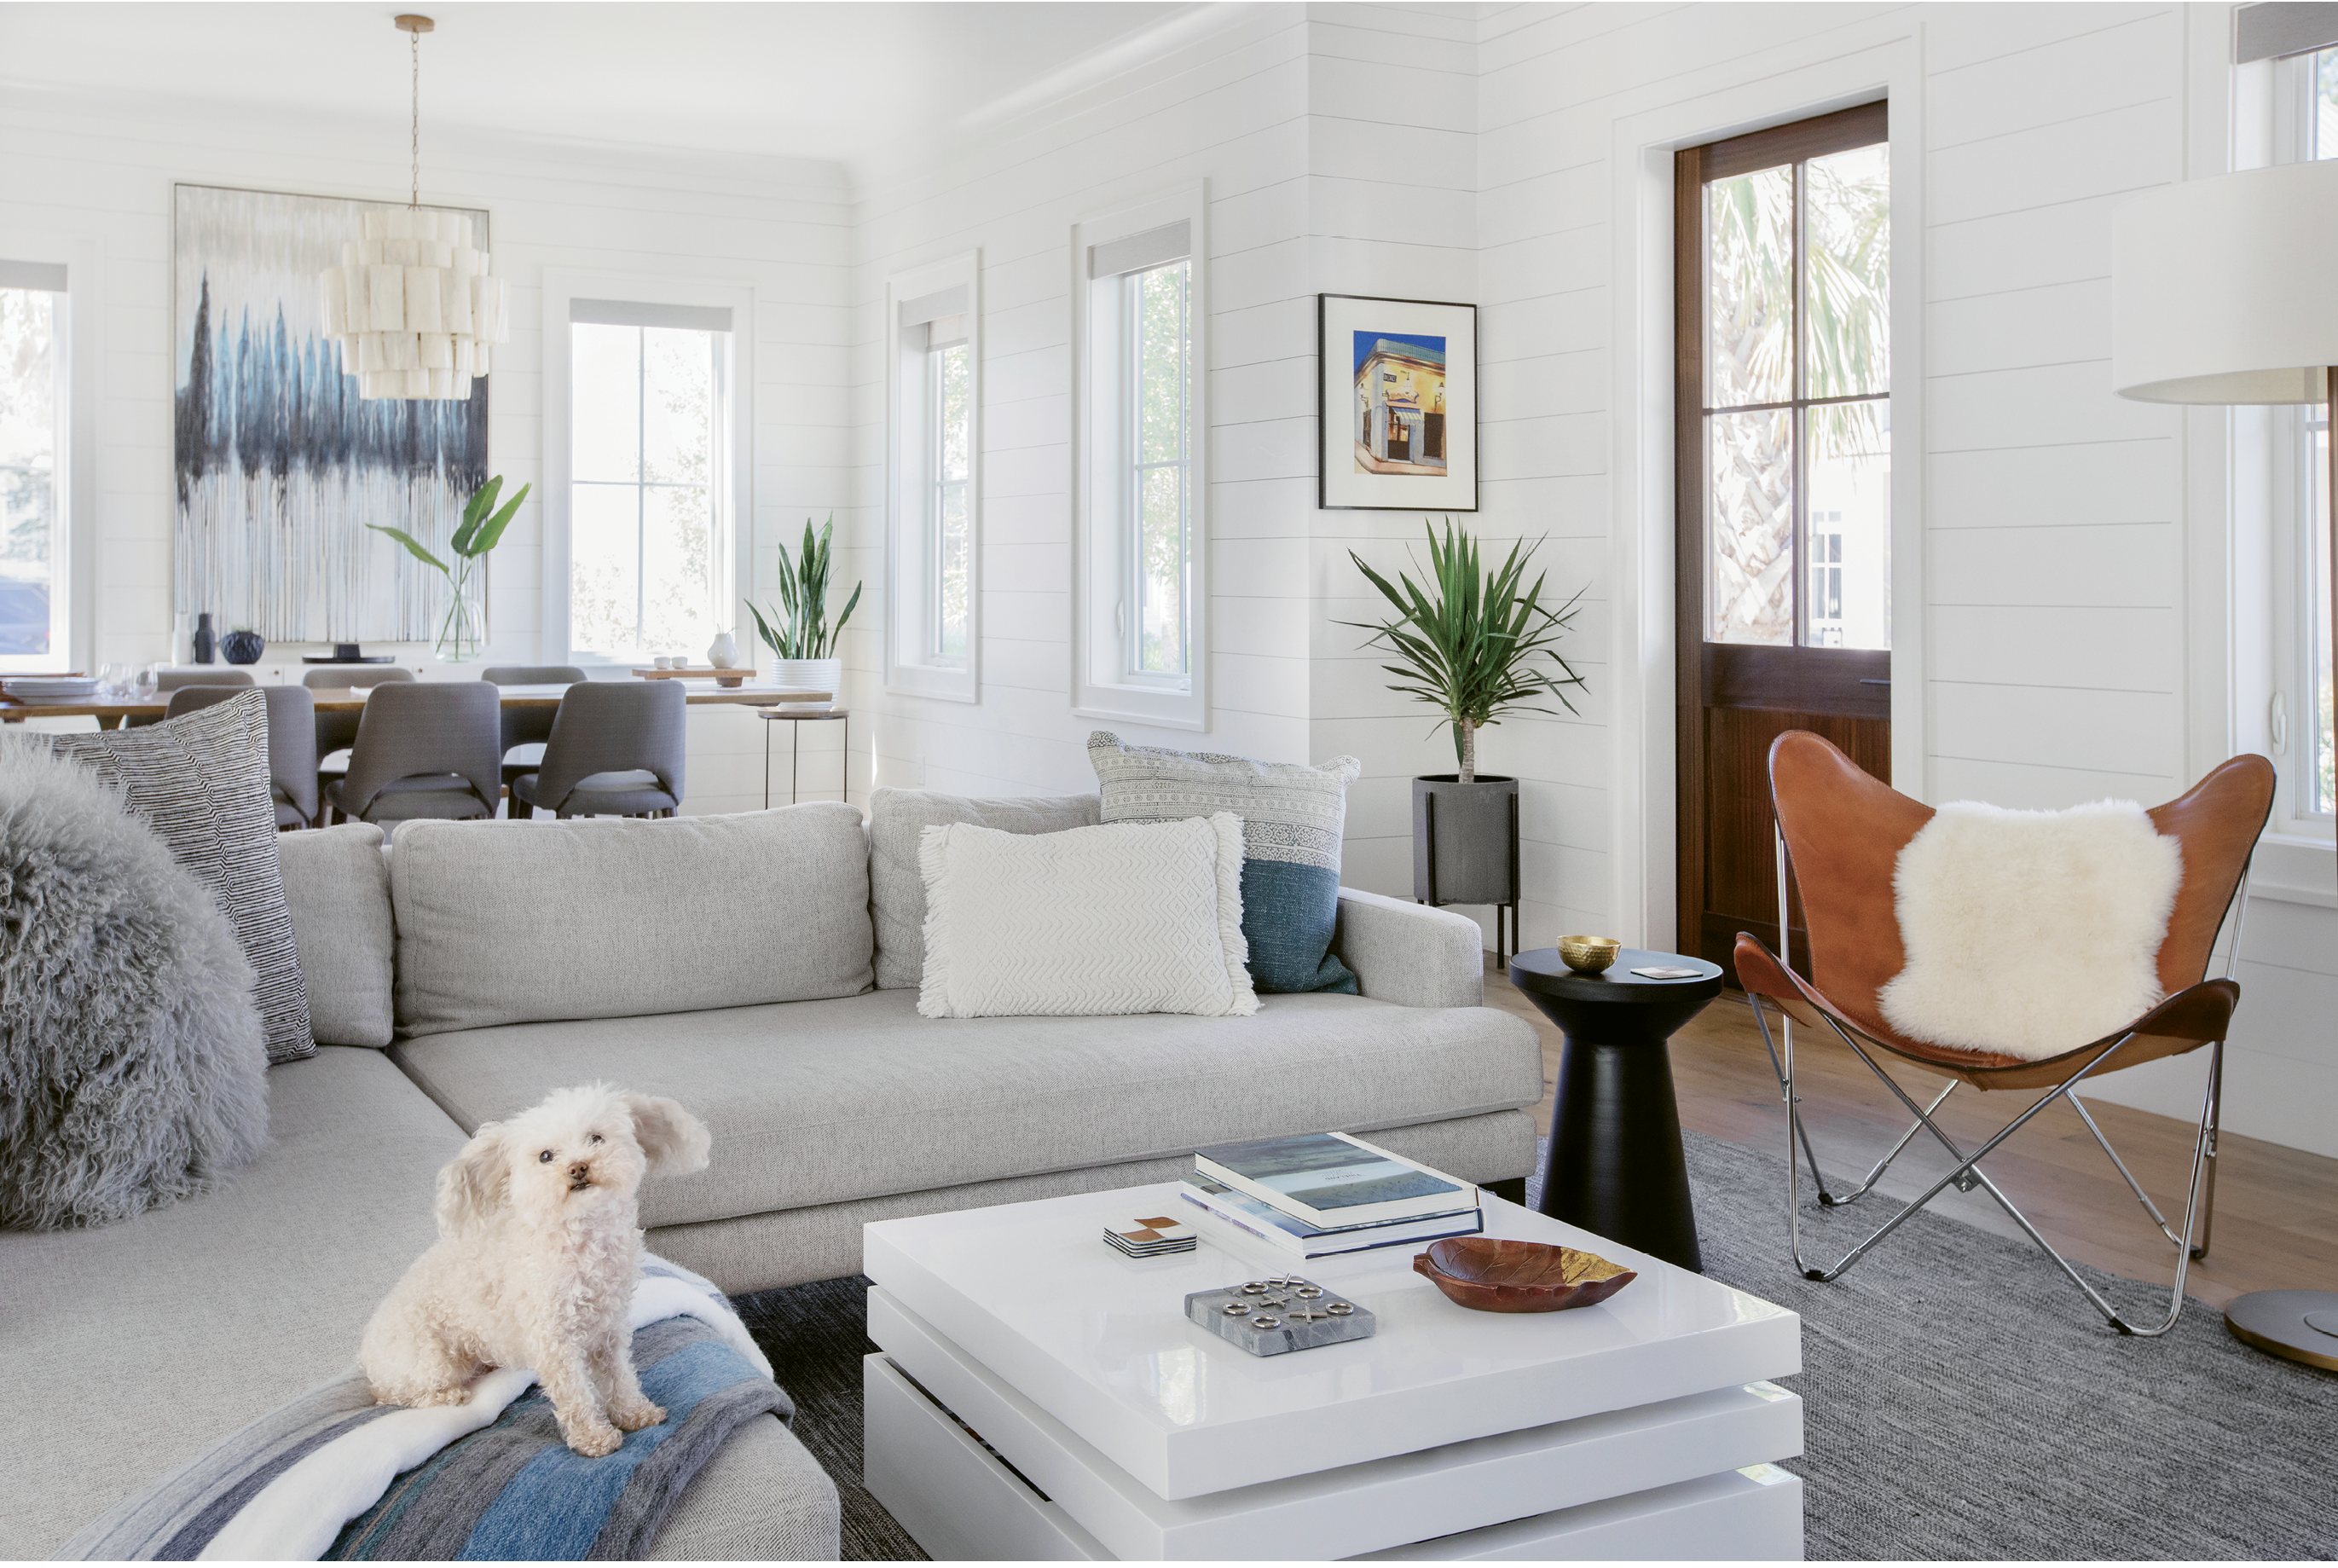 Wide-Open Spaces: Shiplap walls painted in Benjamin Moore’s “White Dove,” oak floors, and reclaimed beams set the stage for the open living area, including a cozy sectional sofa from West Elm where Mia the Maltipoo relaxes among pillows from Lyndon Leigh.